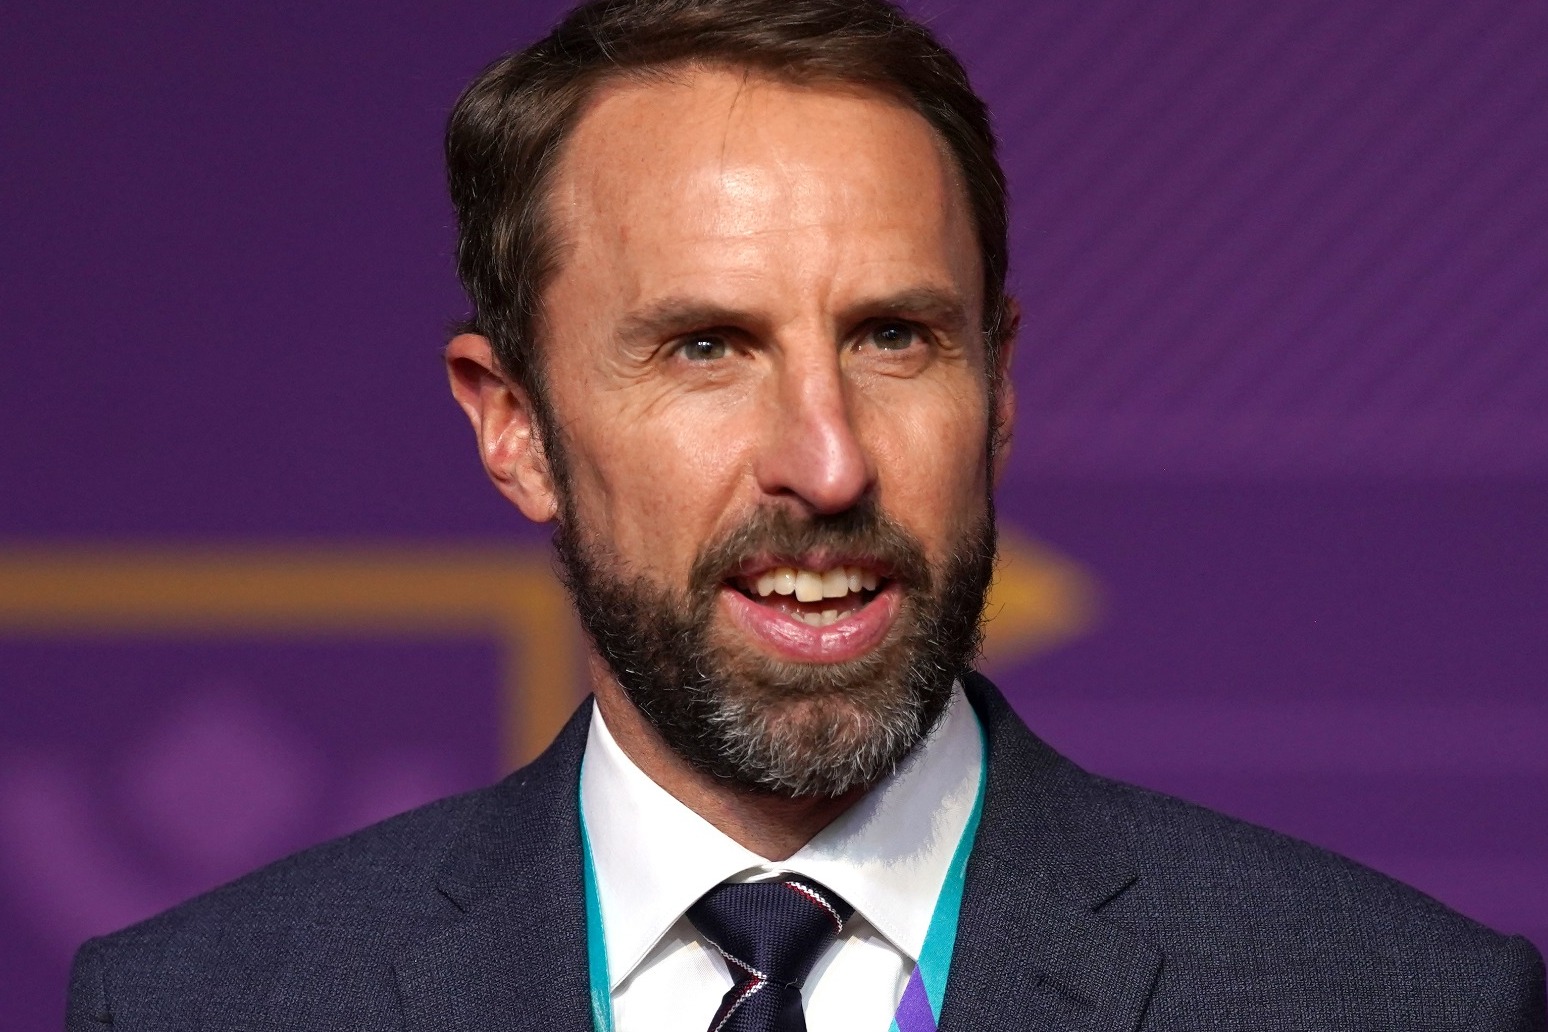 Gareth Southgate expects ‘tricky’ World Cup ties despite favourable England draw 